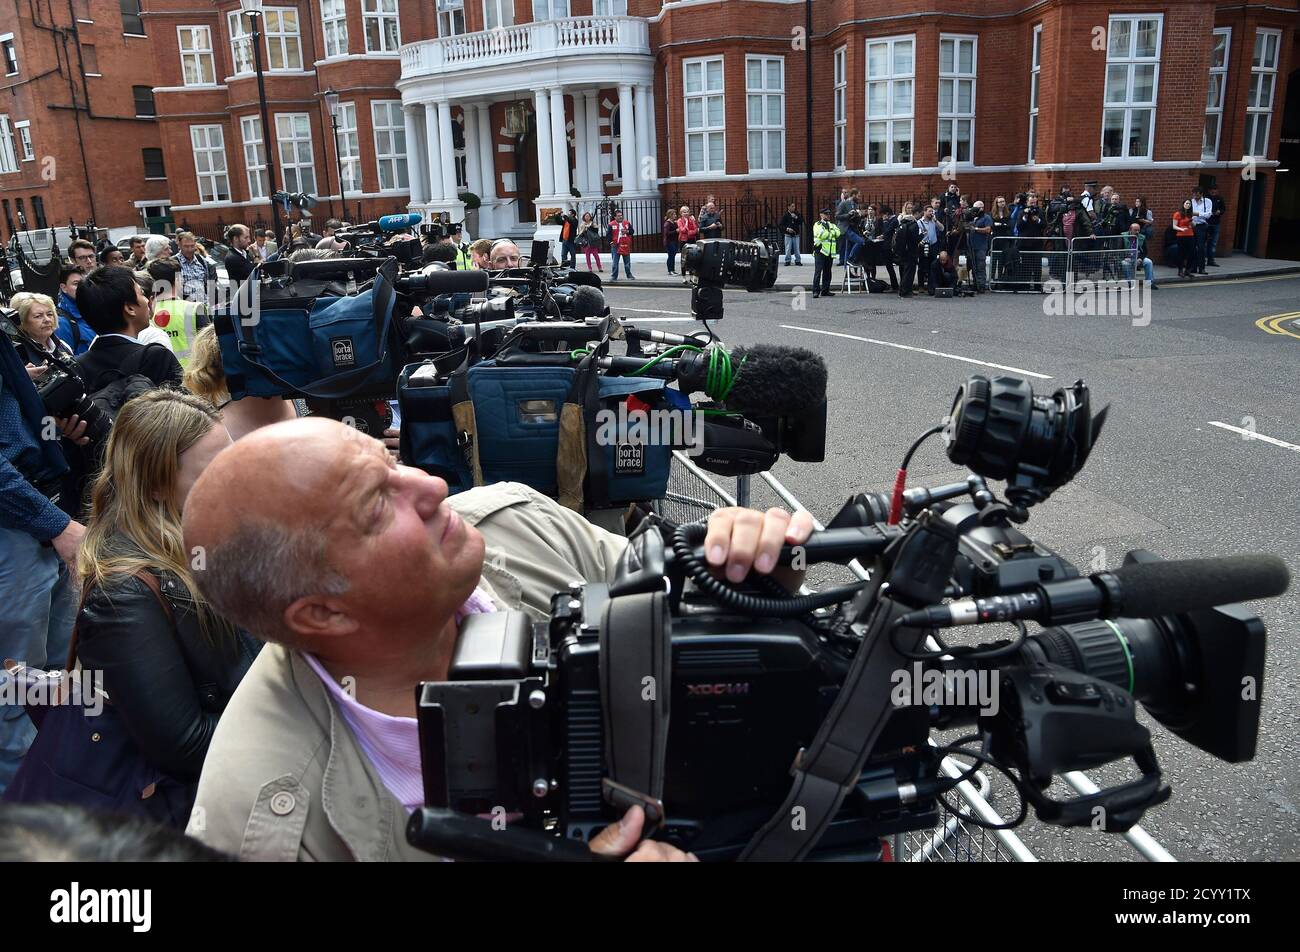 Members of the media wait outside the Ecuadorian embassy during a news conference by WikiLeaks founder Julian Assange in central London August 18, 2014.      REUTERS/Toby Melville (BRITAIN  - Tags: CRIME LAW POLITICS) Stock Photo